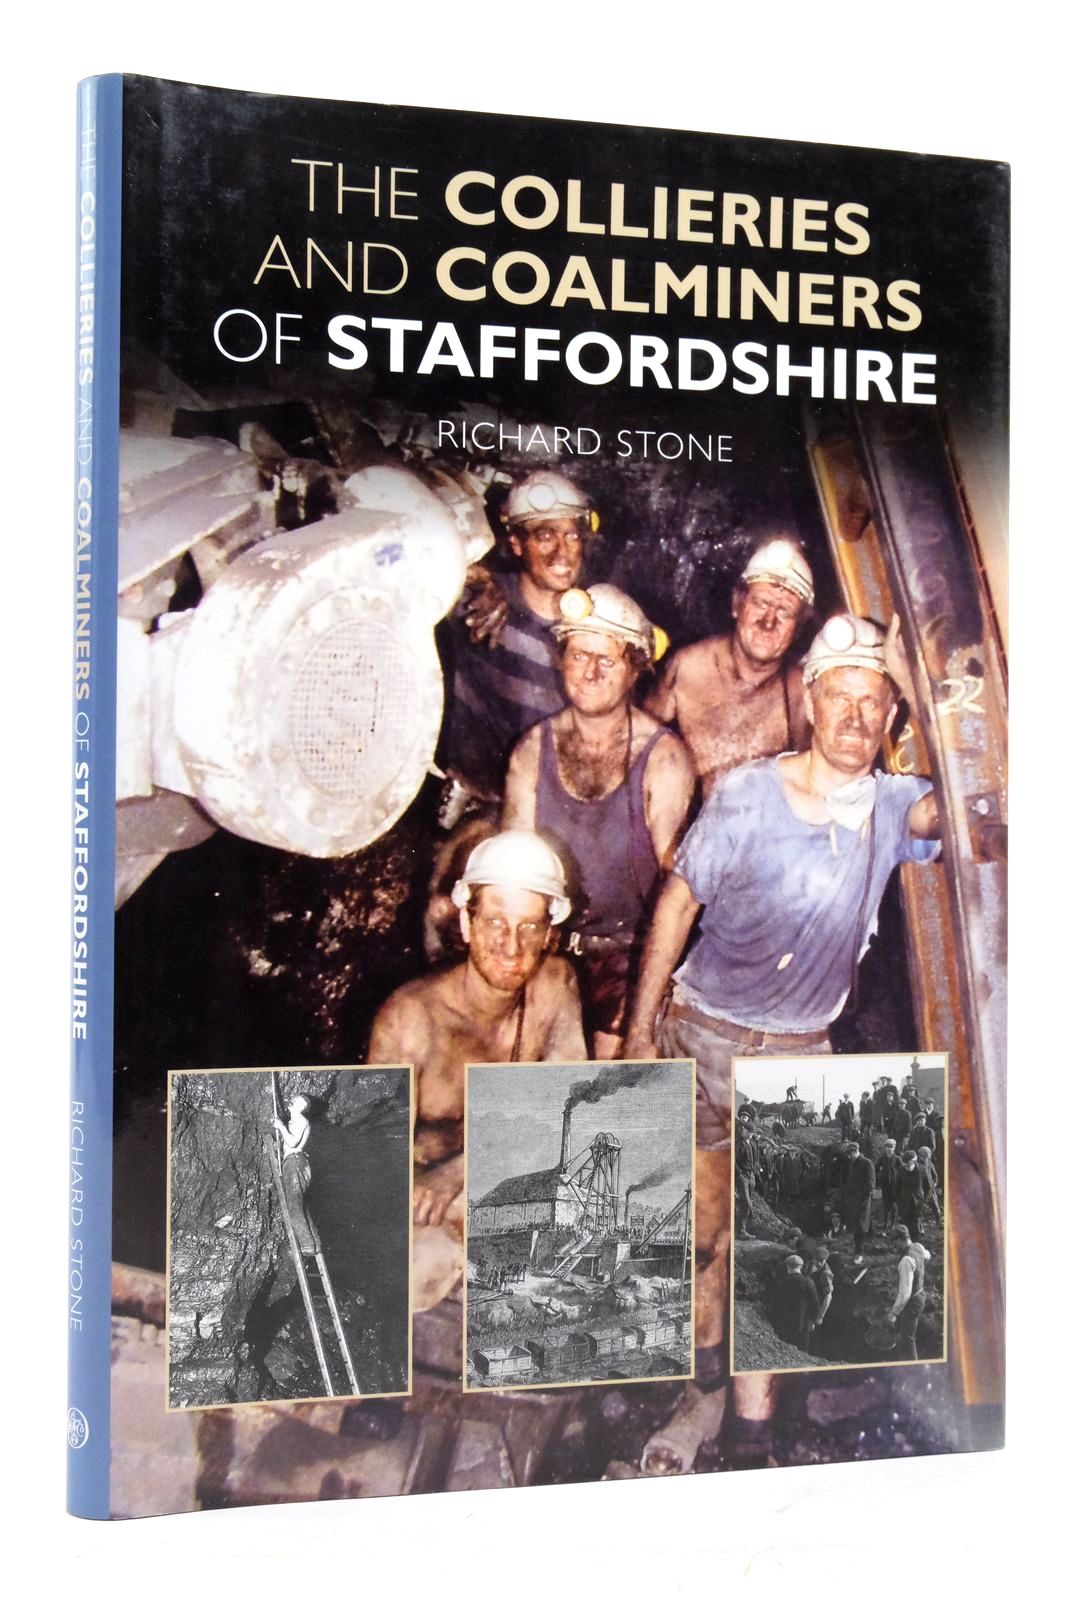 Photo of THE COLLIERIES AND COALMINERS OF STAFFORDSHIRE written by Stone, Richard published by Phillimore (STOCK CODE: 2137946)  for sale by Stella & Rose's Books